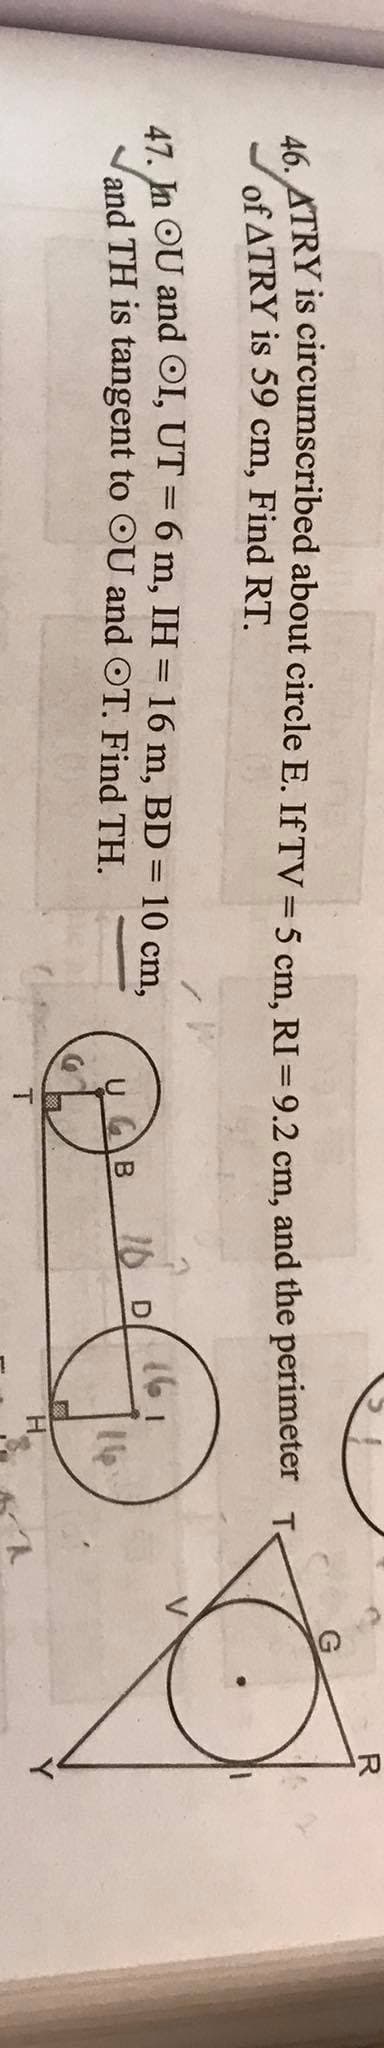 R
16 ATRY is circumscribed about circle E. If TV =5 cm, RI =9.2 cm, and the perimeter Te
of ATRY is 59 cm, Find RT.
47 In OU and OI, UT = 6 m, IH = 16 m, BD = 10 cm,
and TH is tangent to OU and OT. Find TH.
|3D
161
16
16 D
T.
H.
